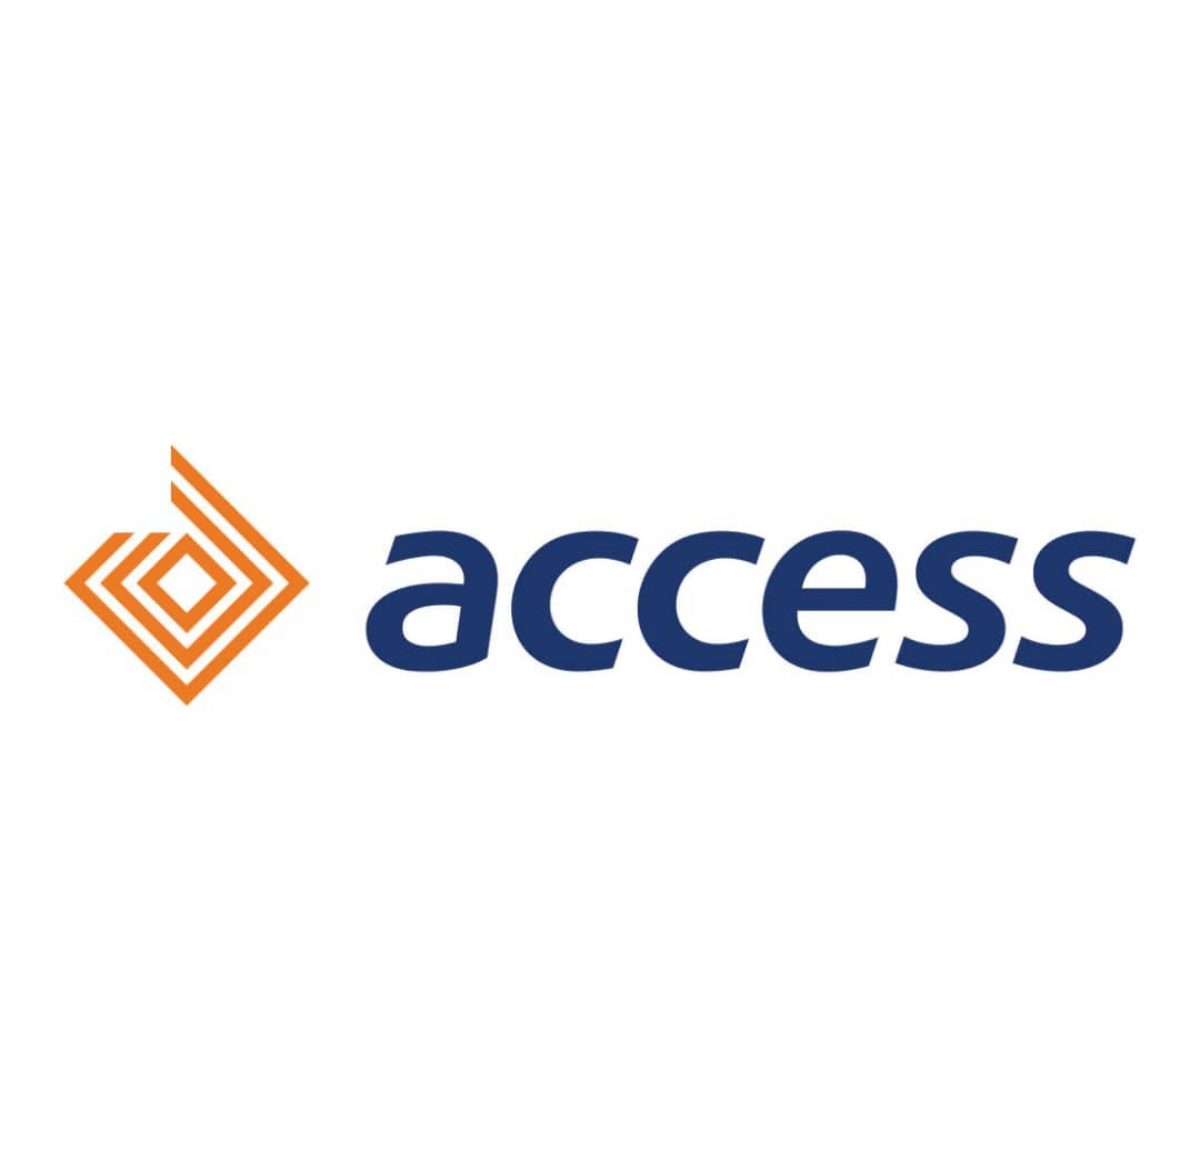 How to Check Access Bank Account Balance on MTN & Airtel (Online & With Code)